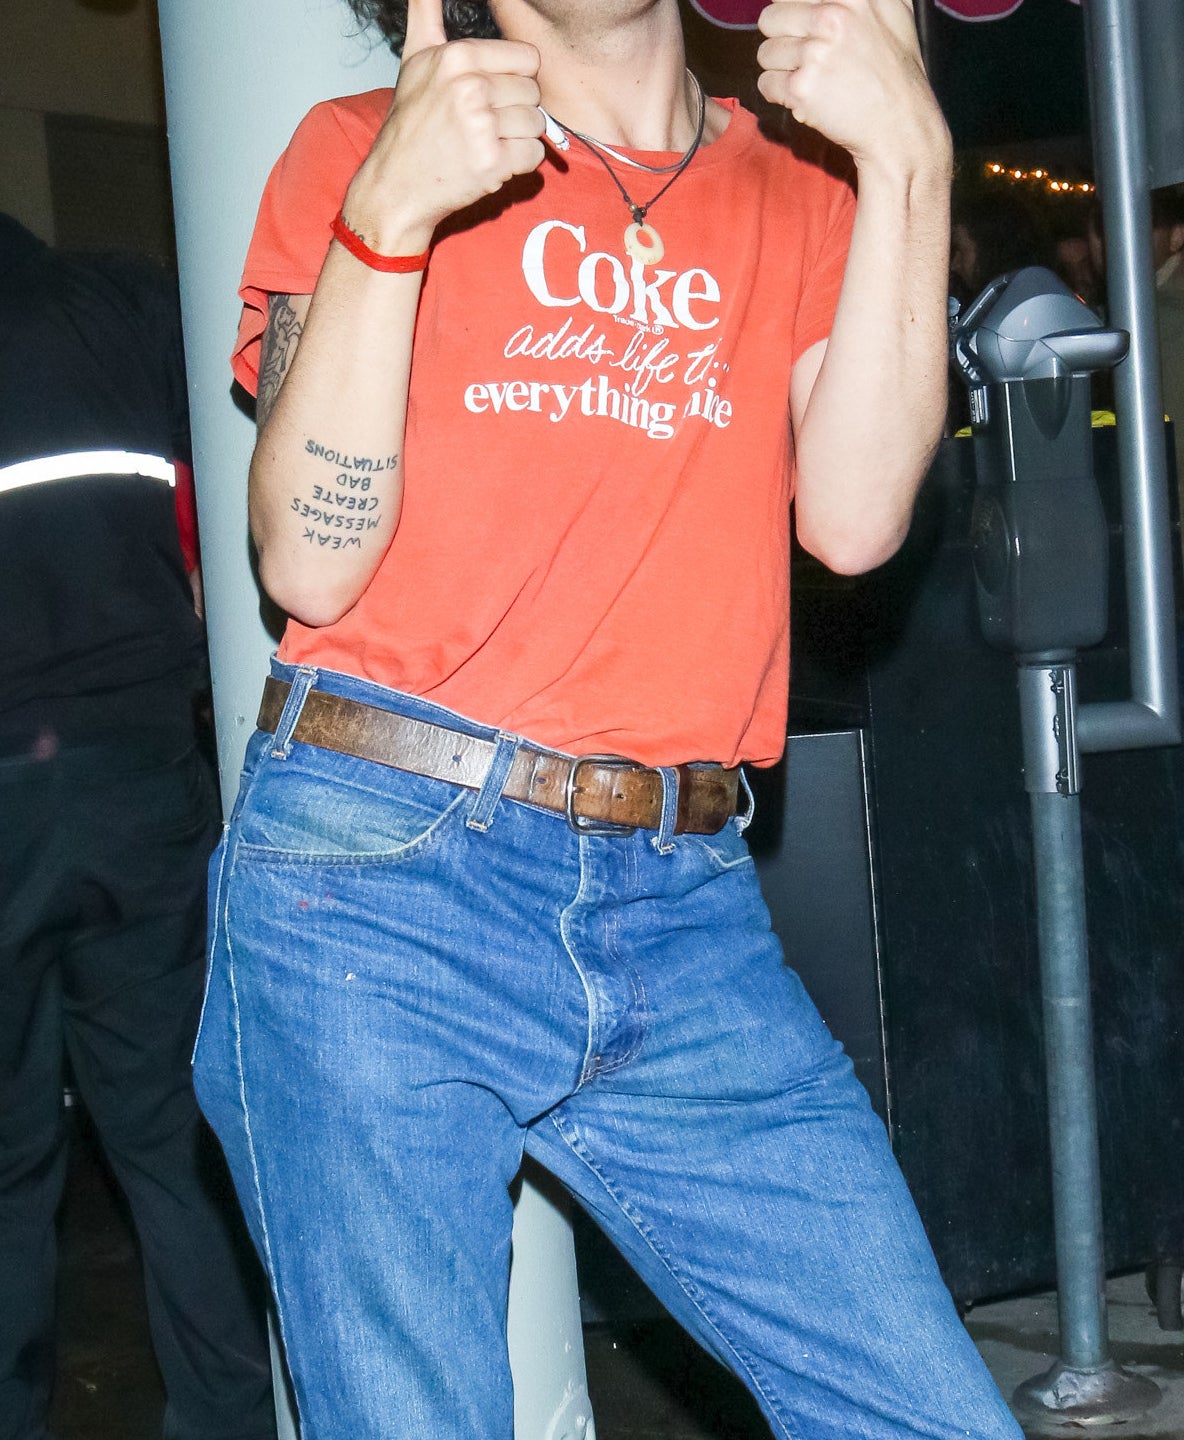 Close-up of Matty smiling, wearing a &quot;Coke adds life to everything nice&quot; T-shirt, and giving two thumbs-up